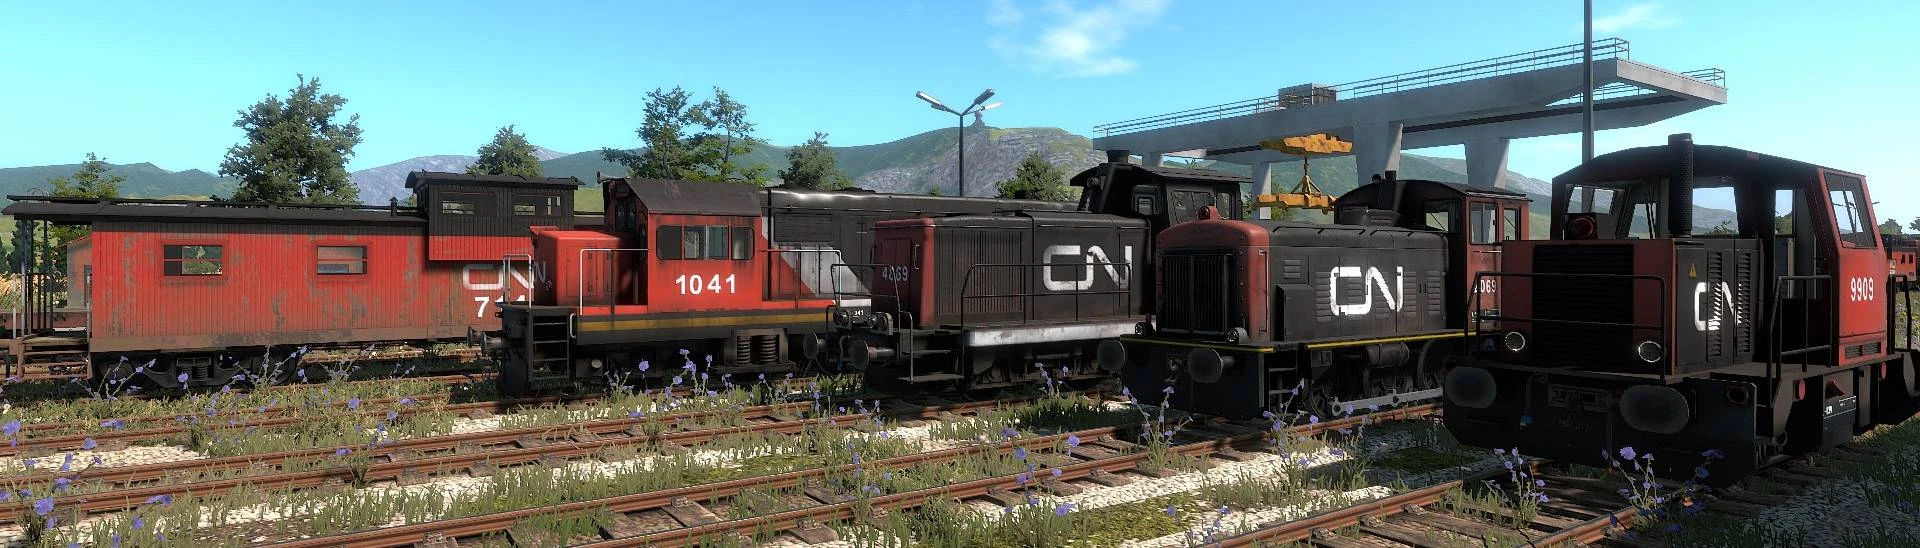 Rail Driver Integration at Derail Valley Nexus - Mods and community